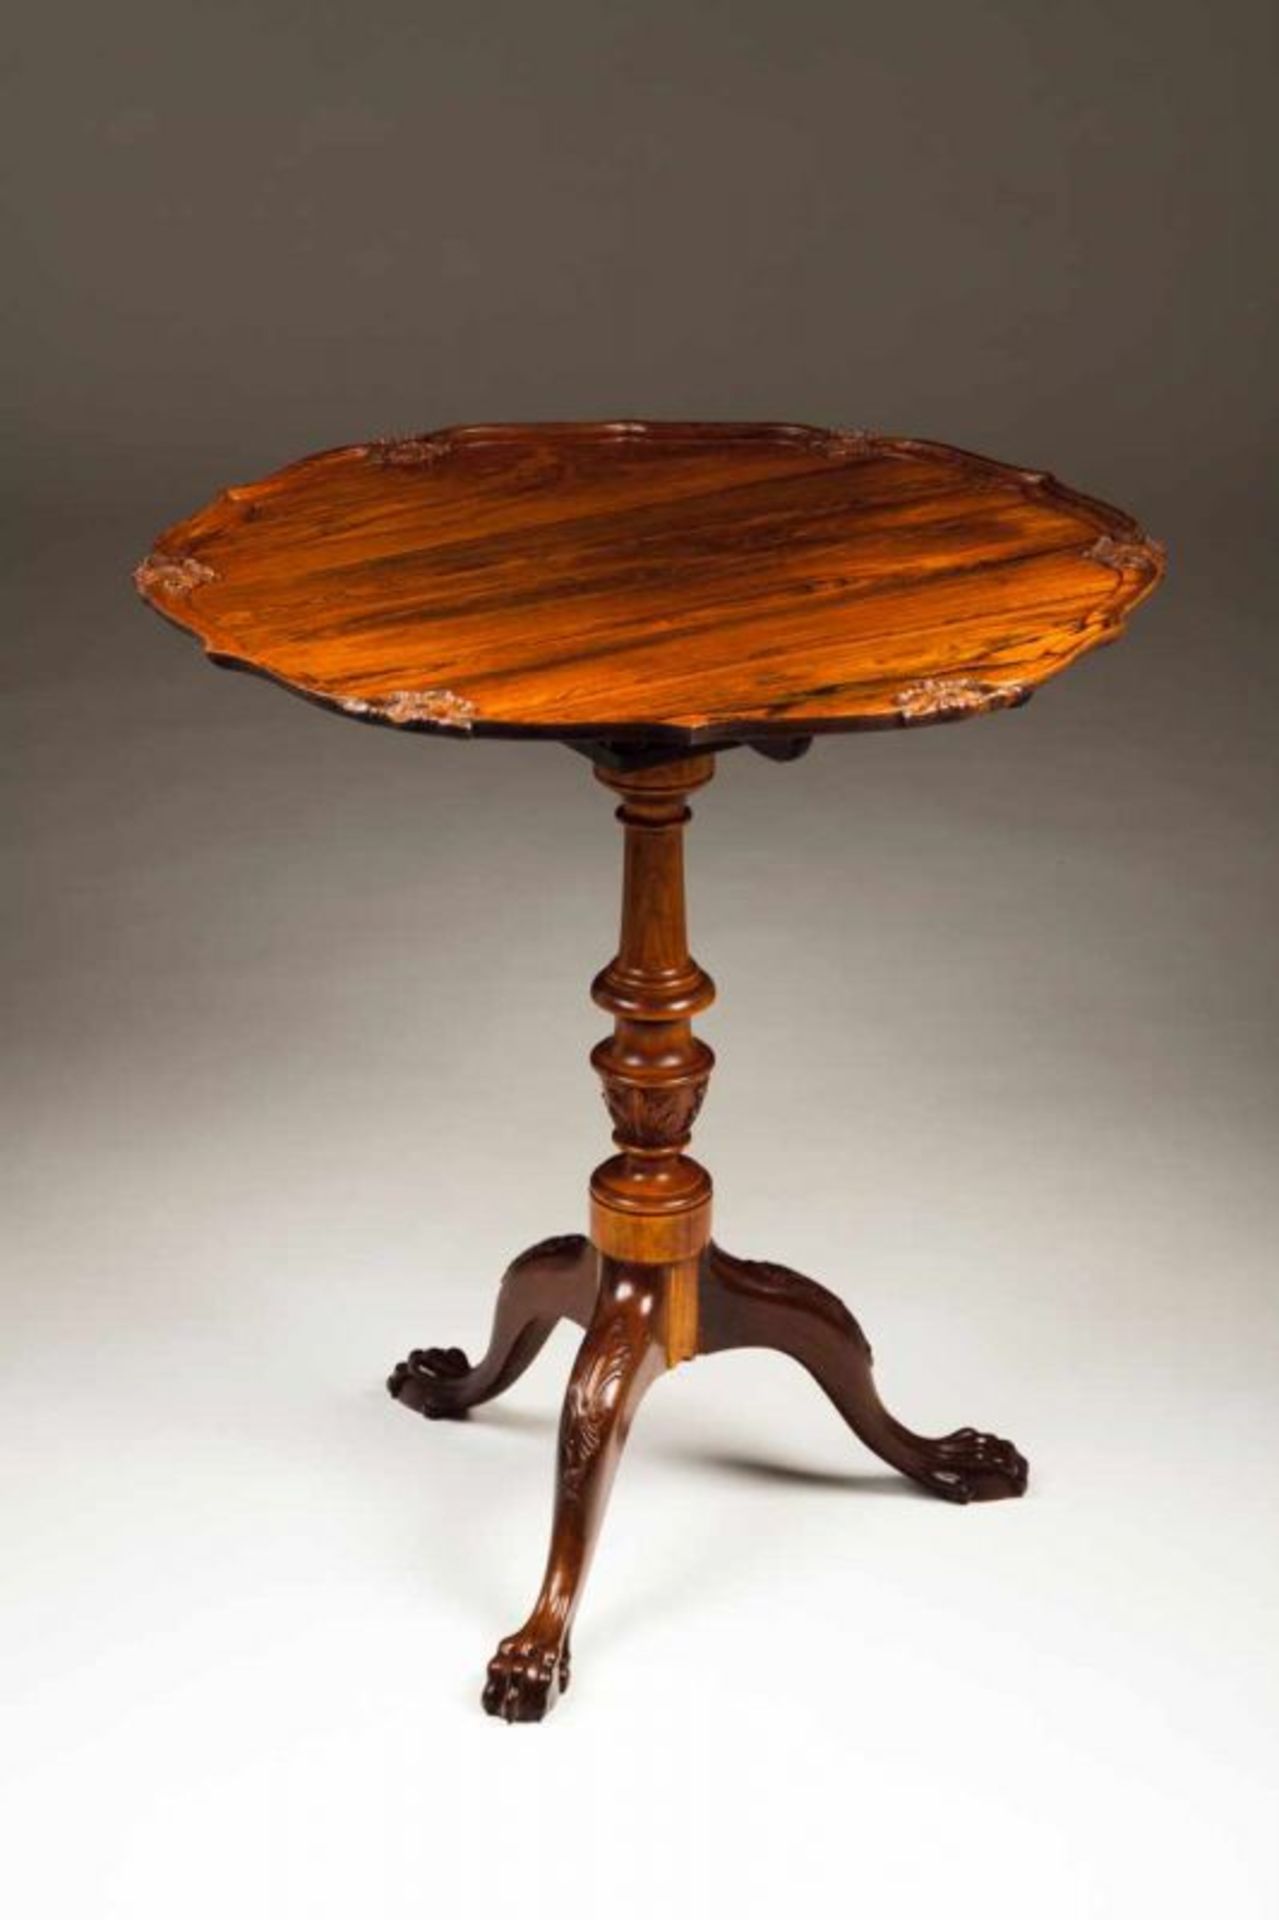 A D. José style tripod table Rosewood and other woods Scalloped tilt top with carved decoration